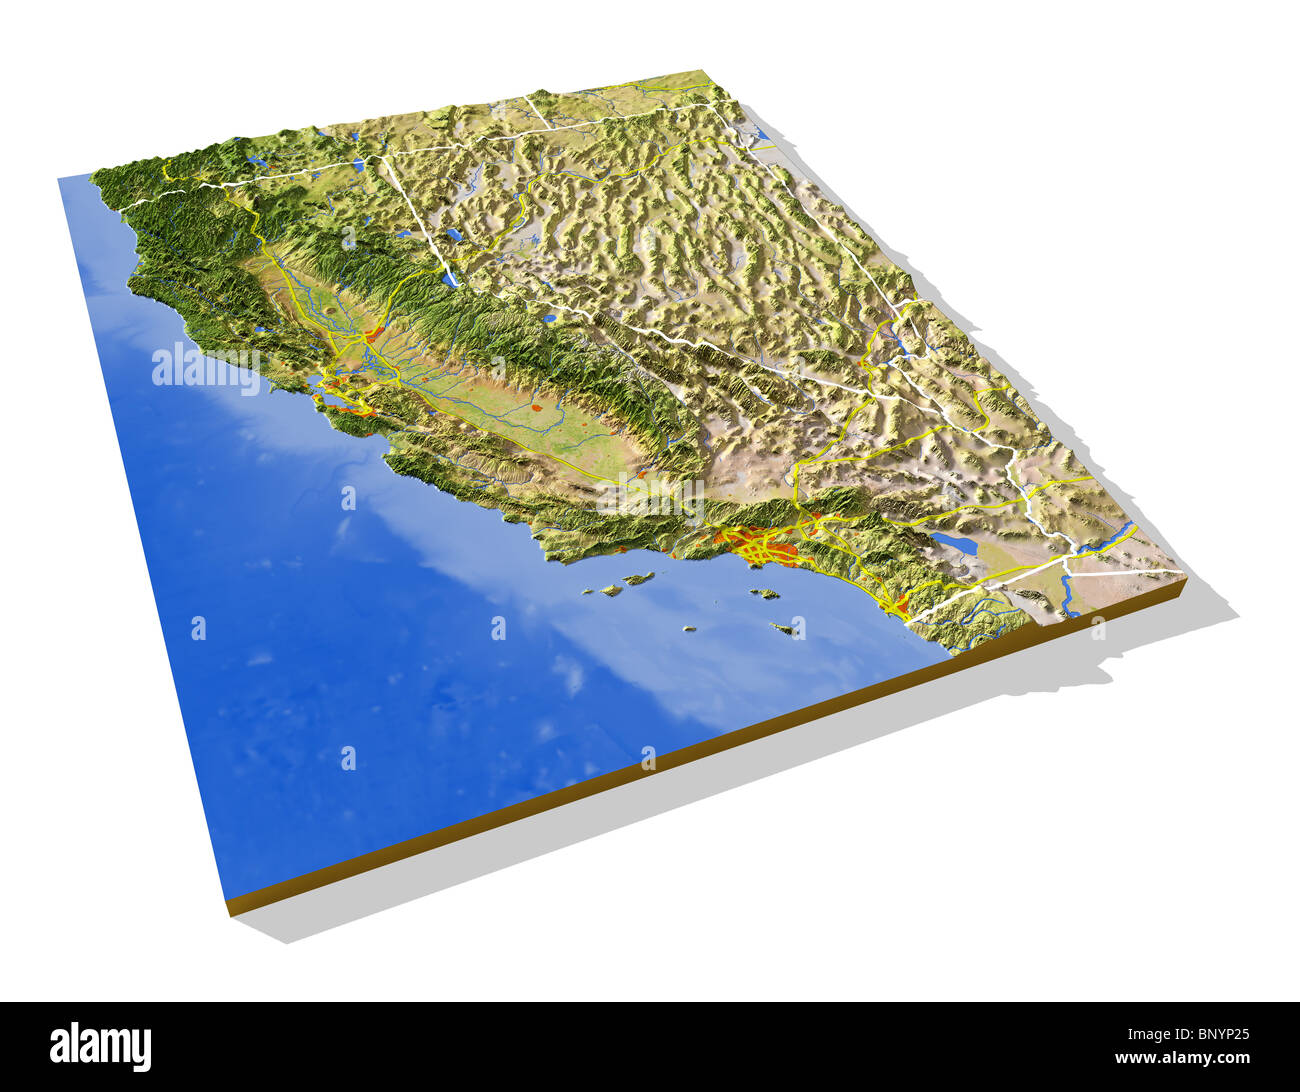 California, 3D relief map with urban areas, interstate highways and borders. Stock Photo